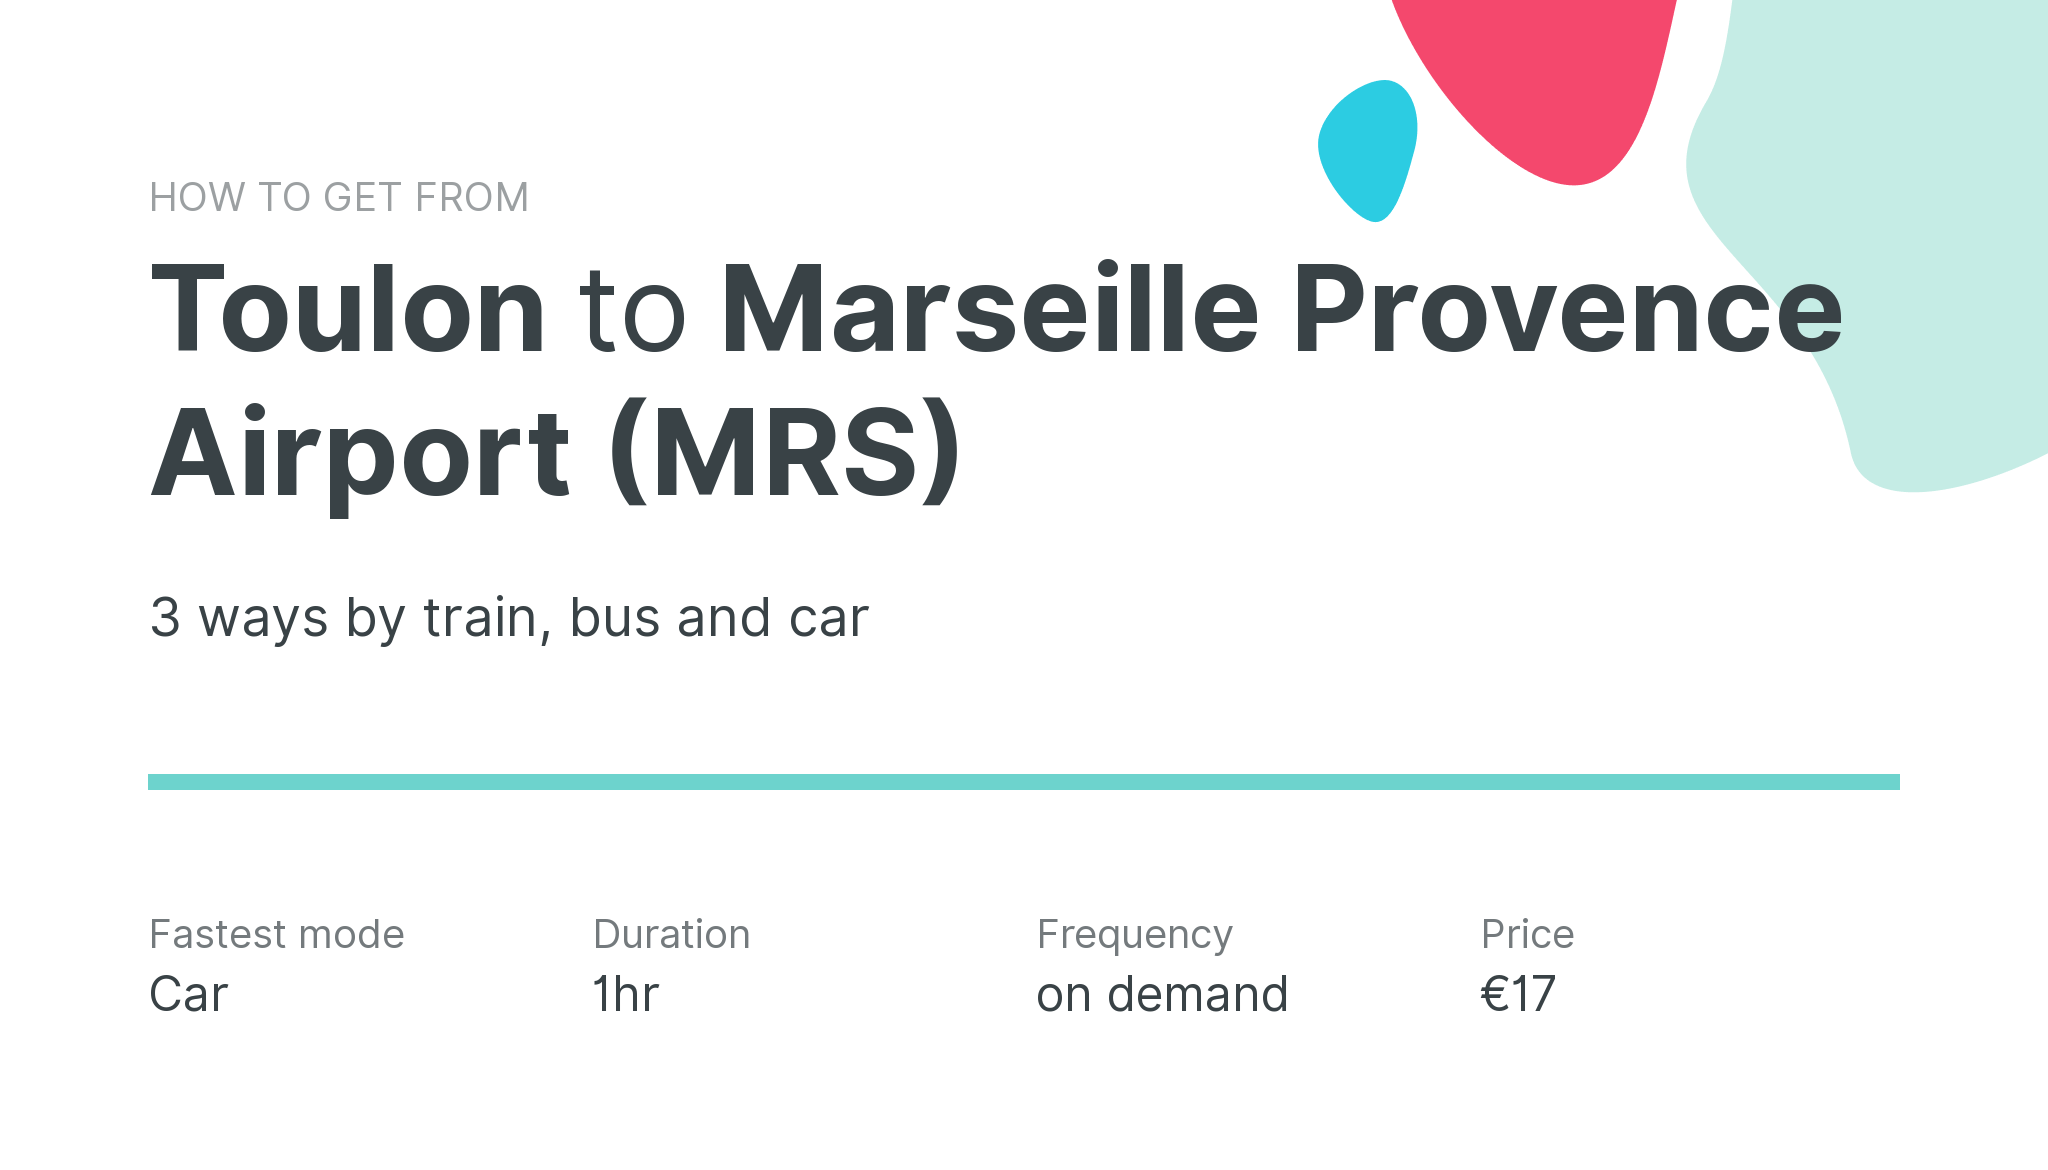 How do I get from Toulon to Marseille Provence Airport (MRS)